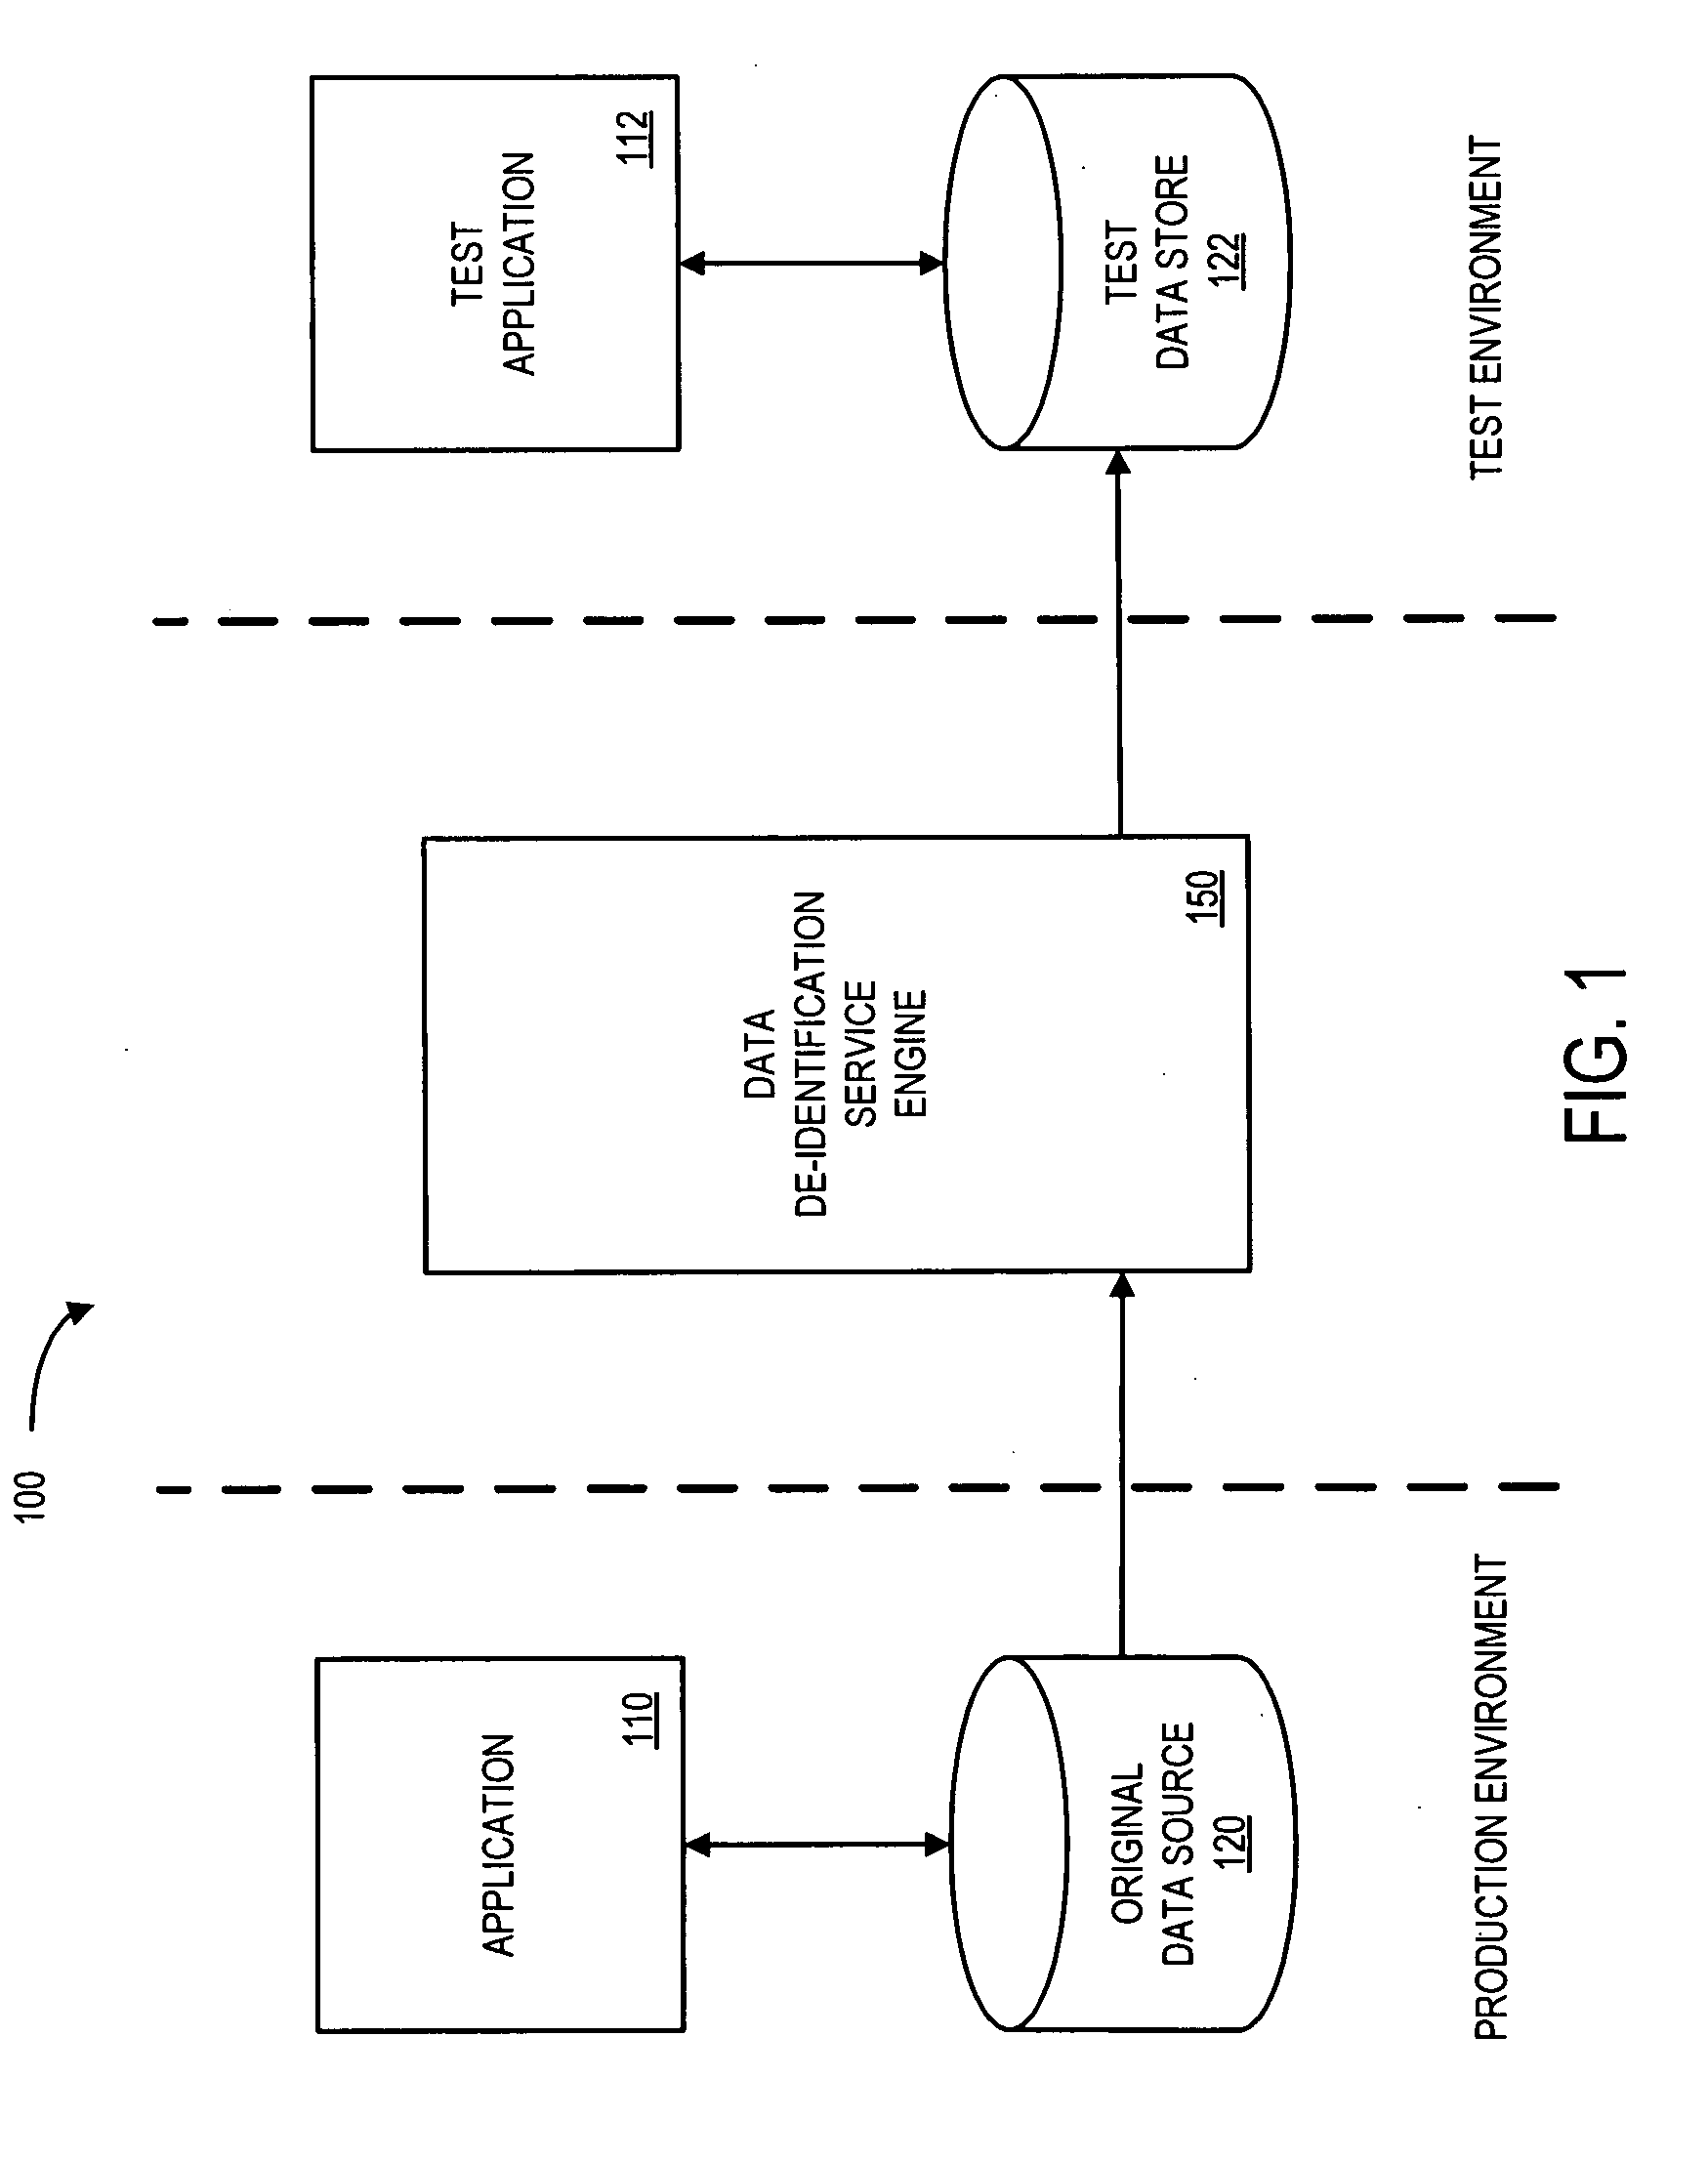 Systems and methods for de-identification of personal data